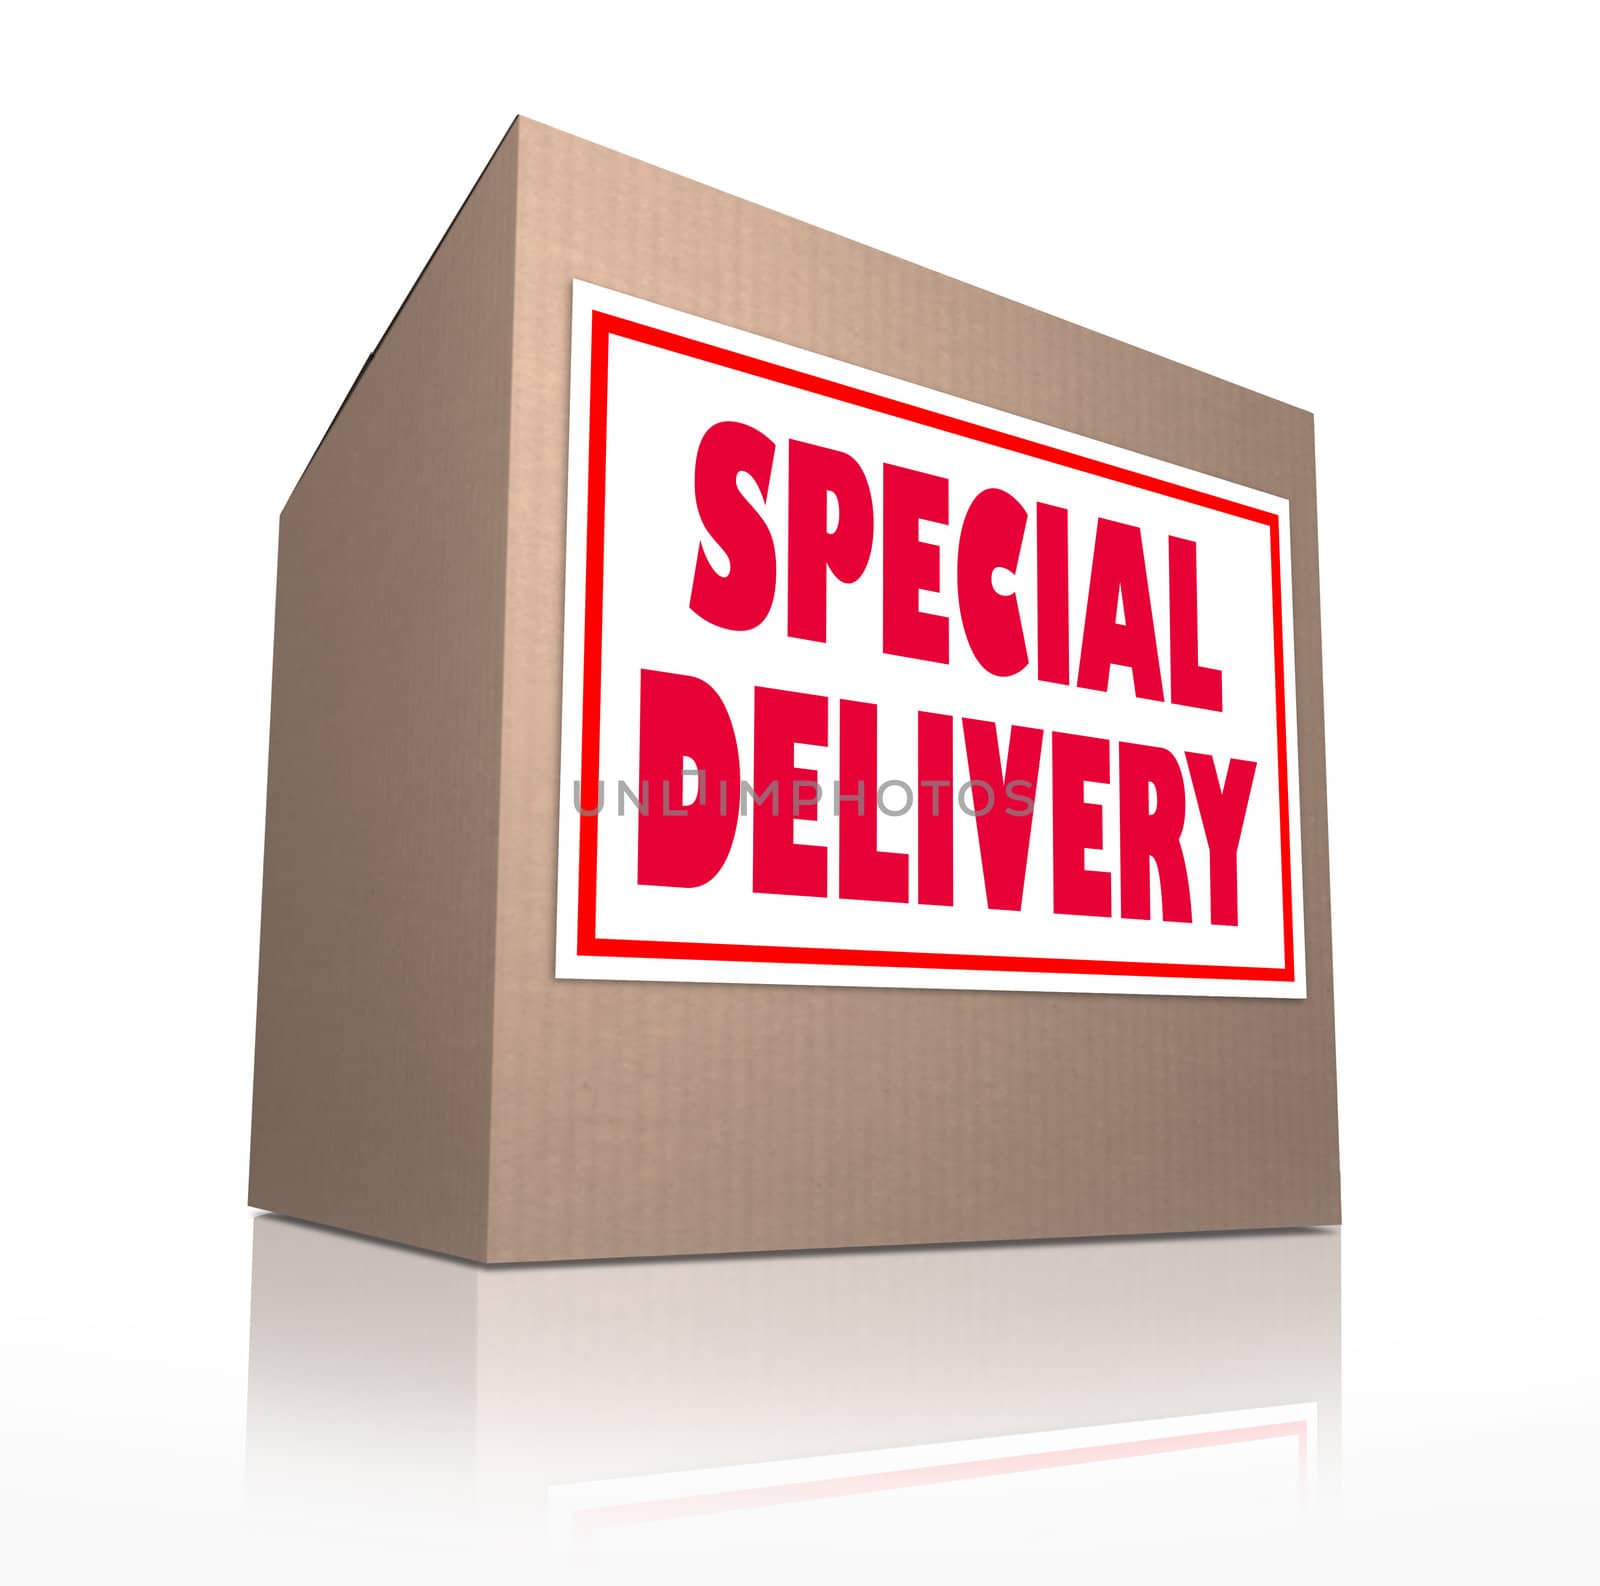 The words Special Delivery on a cardboard box sent through the mail containing merchandise from shopping or a gift or present for a special occasion